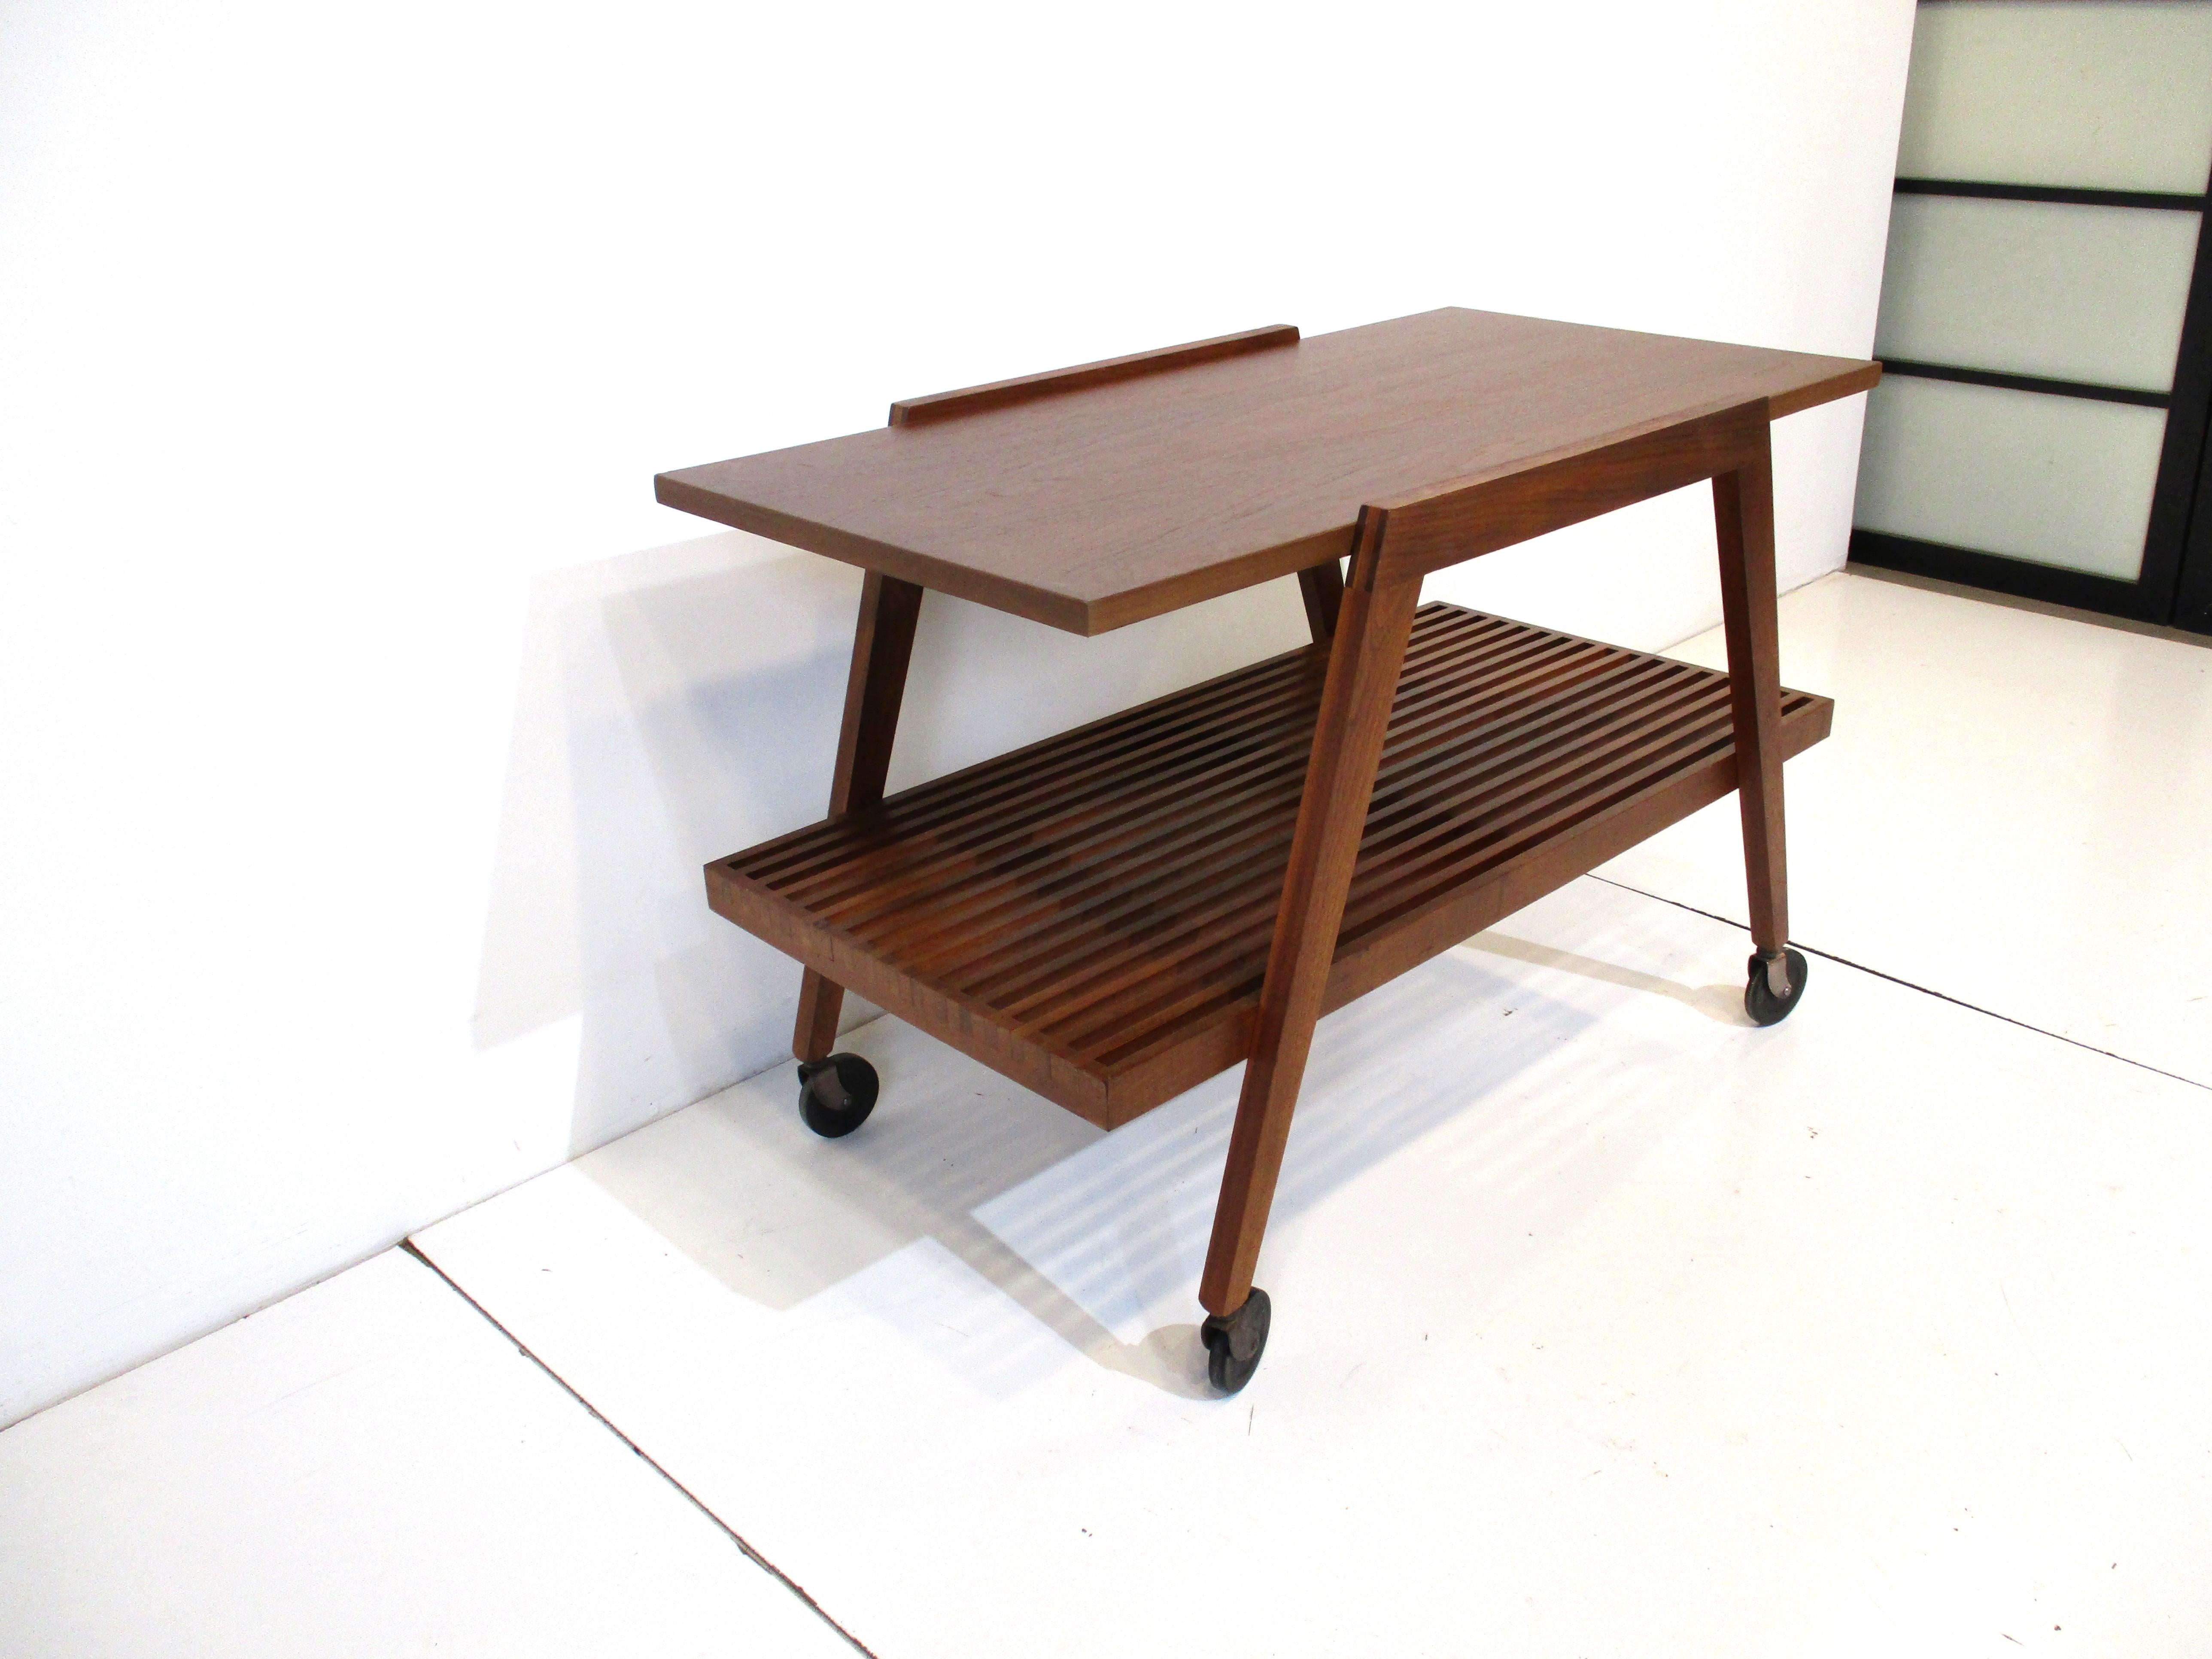 A medium dark walnut rolling bar cart with solid upper shelve and lower slat styled shelve in the manner of George Nelson. The squared arched side frames make the piece sturdy and gives the piece that mid-century well crafted quality which makes